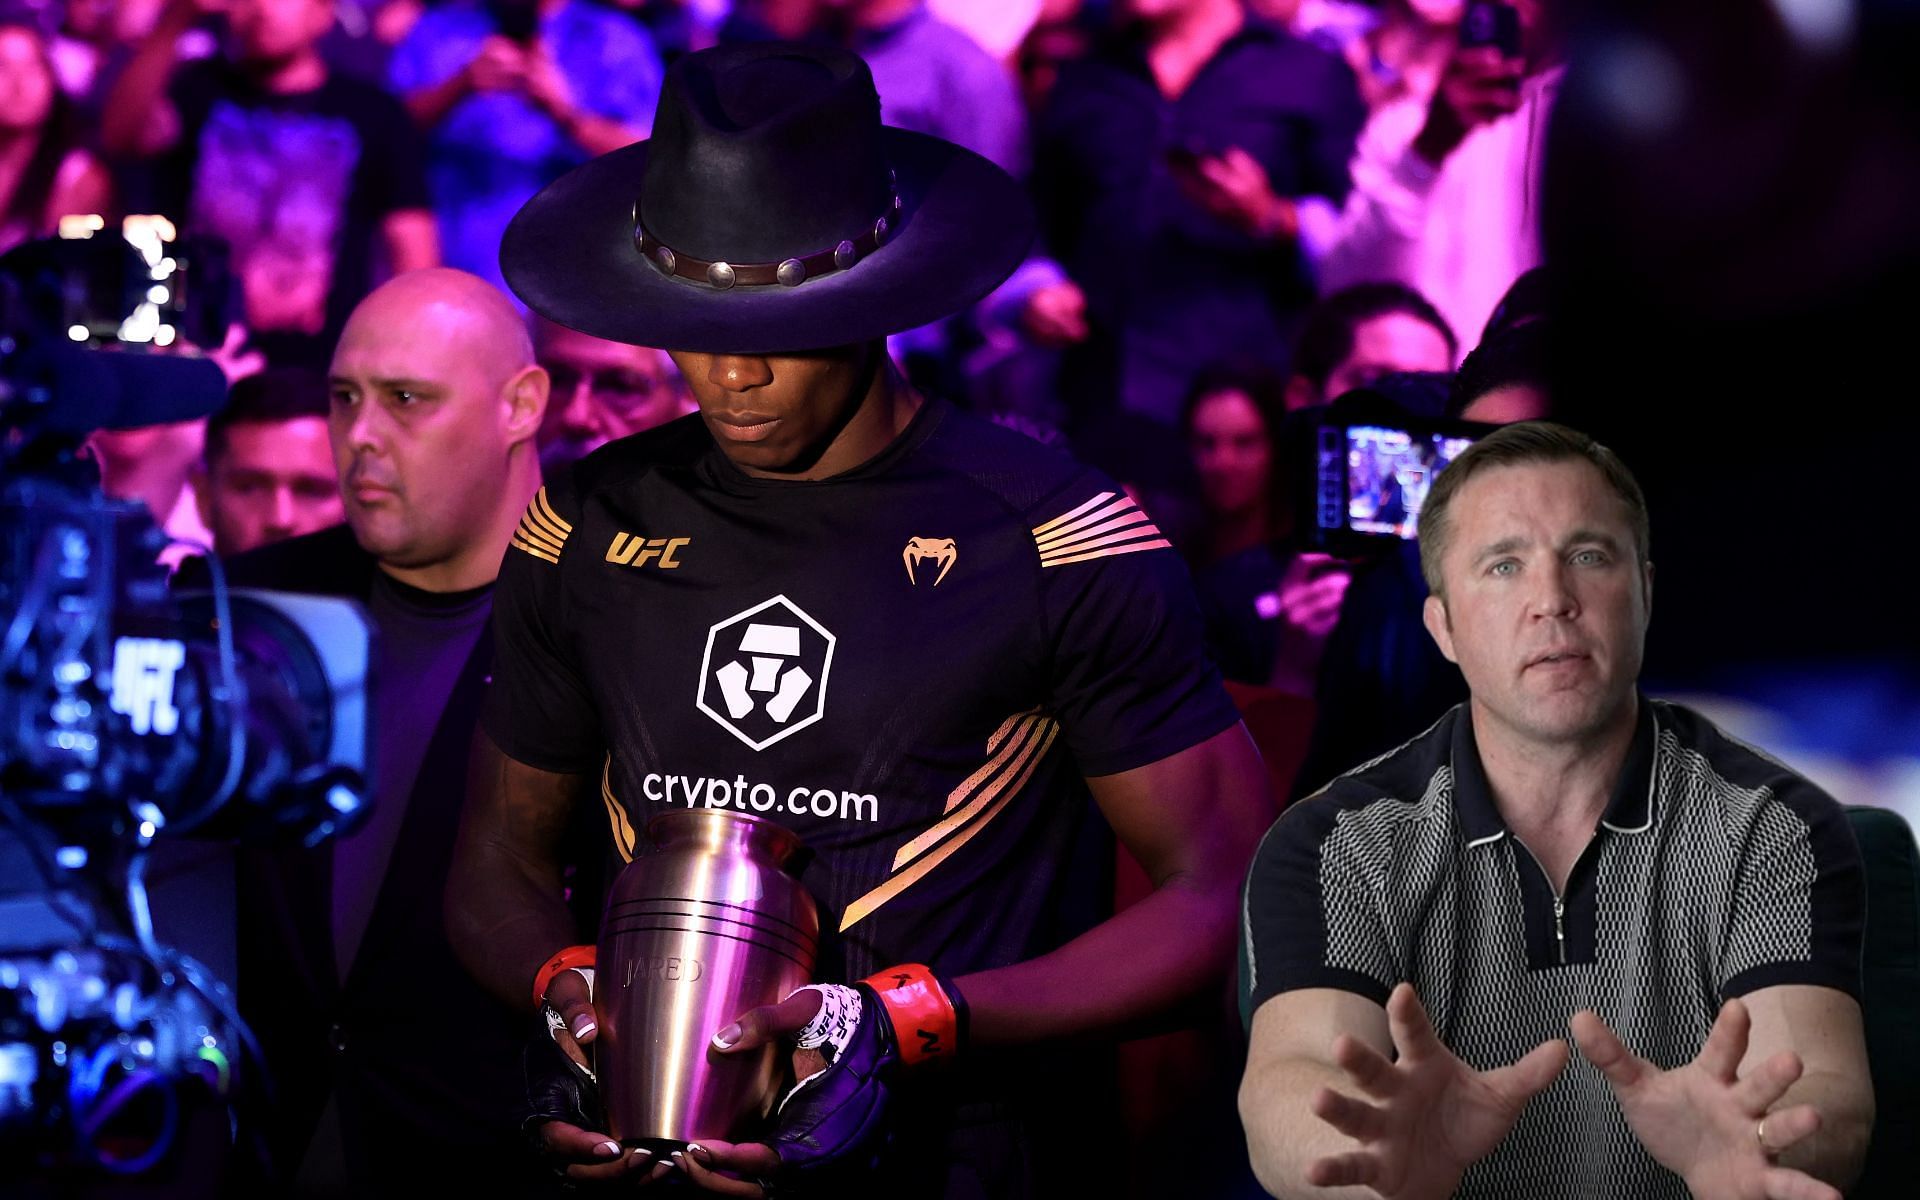 Israel Adesanya (left) and Chael Sonnen (right) (Images via Getty and YouTube/Chael Sonnen)